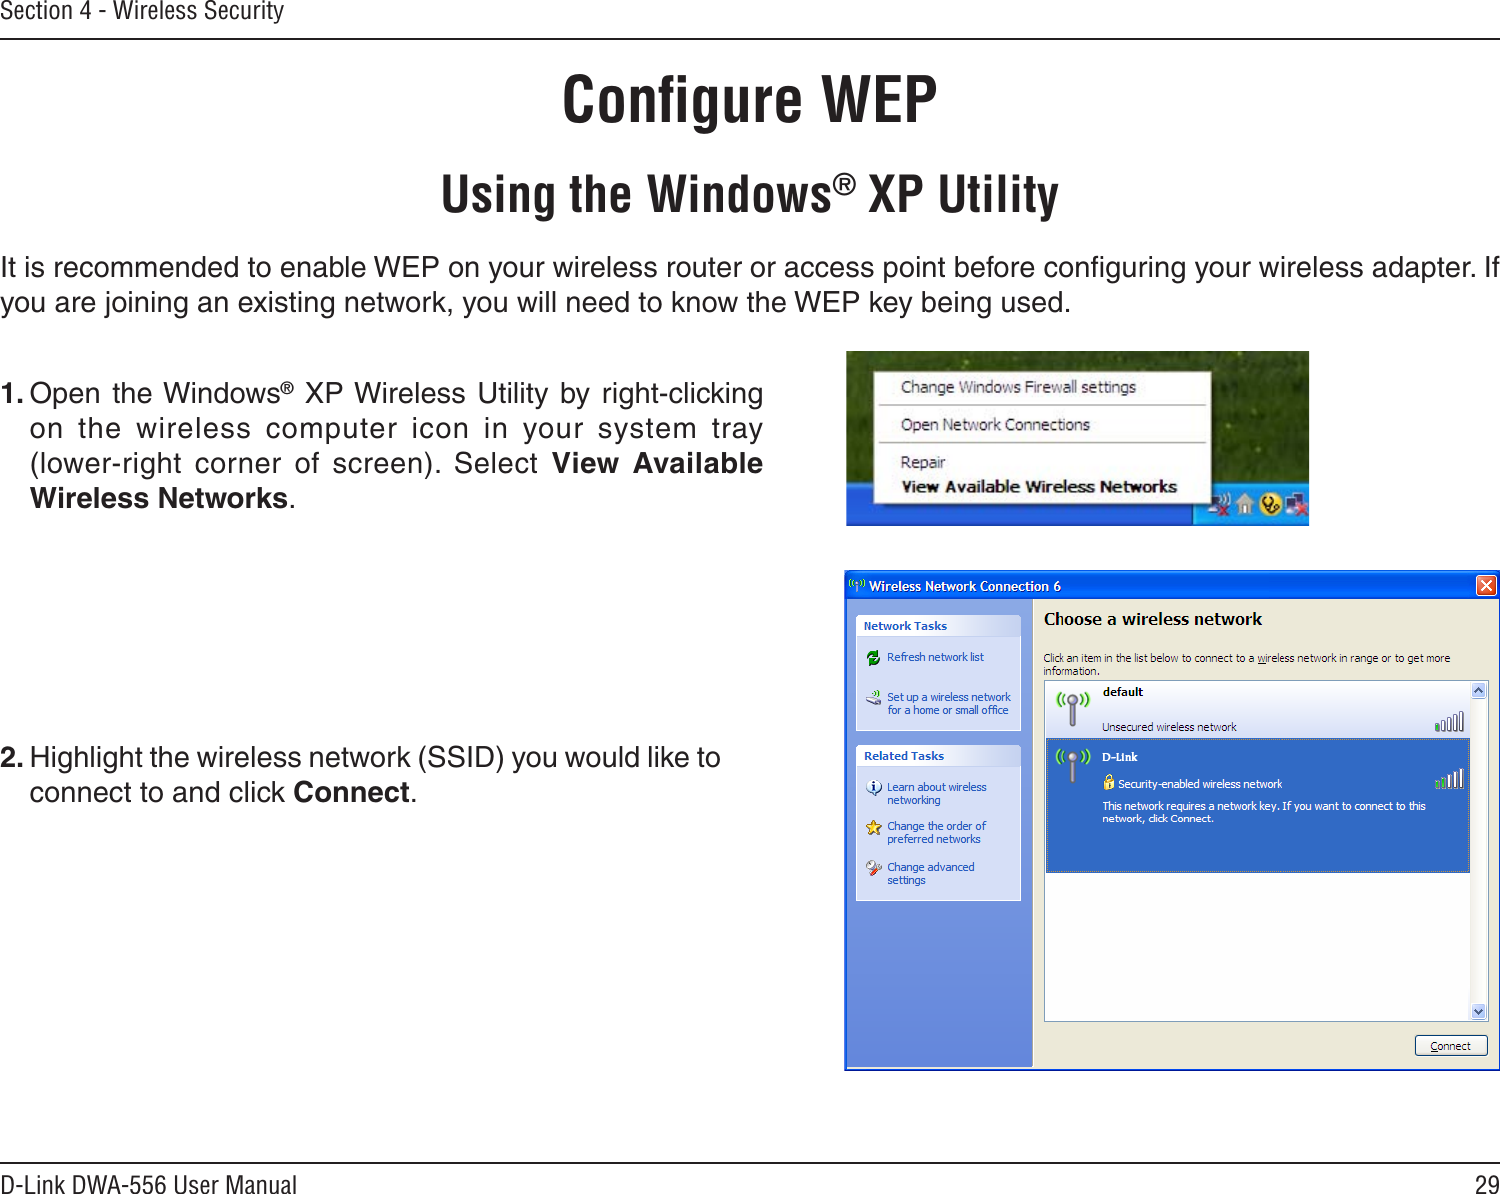 29D-Link DWA-556 User ManualSection 4 - Wireless SecurityConﬁgure WEPUsing the Windows® XP UtilityIt is recommended to enable WEP on your wireless router or access point before conﬁguring your wireless adapter. If you are joining an existing network, you will need to know the WEP key being used.2. Highlight the wireless network (SSID) you would like to connect to and click Connect.1. Open the Windows® XP Wireless  Utility  by right-clicking on  the  wireless  computer  icon  in  your  system  tray  (lower-right  corner  of  screen).  Select  View  Available Wireless Networks. 